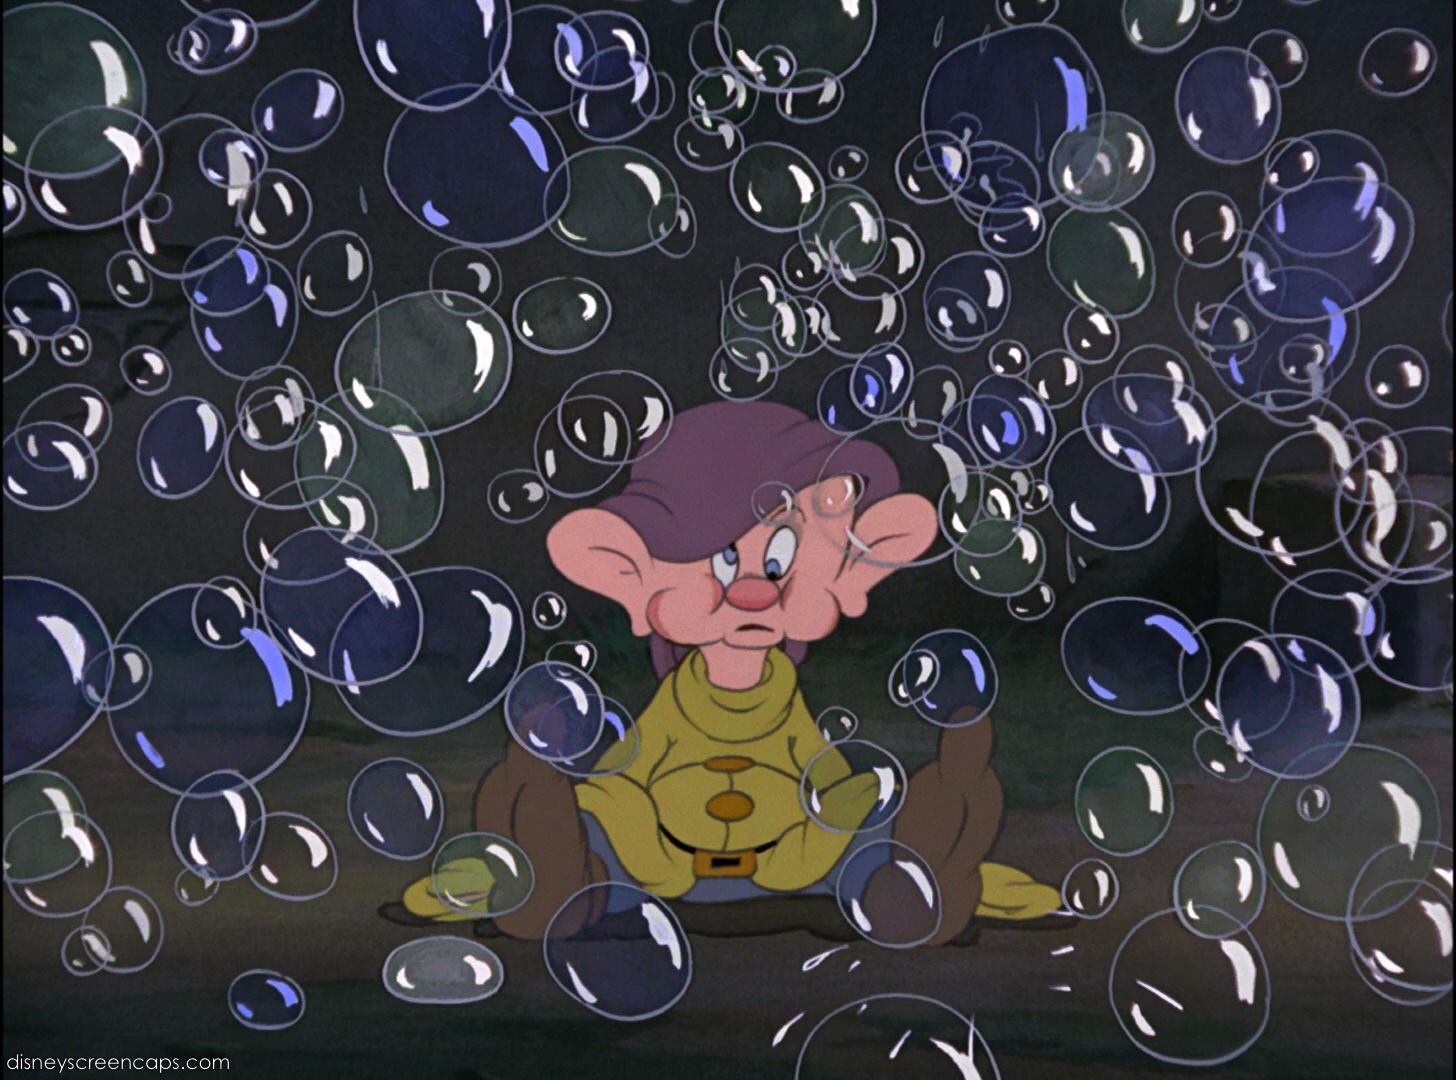 Dopey with the hiccups. Disney cartoons, Disney art, Disney picture